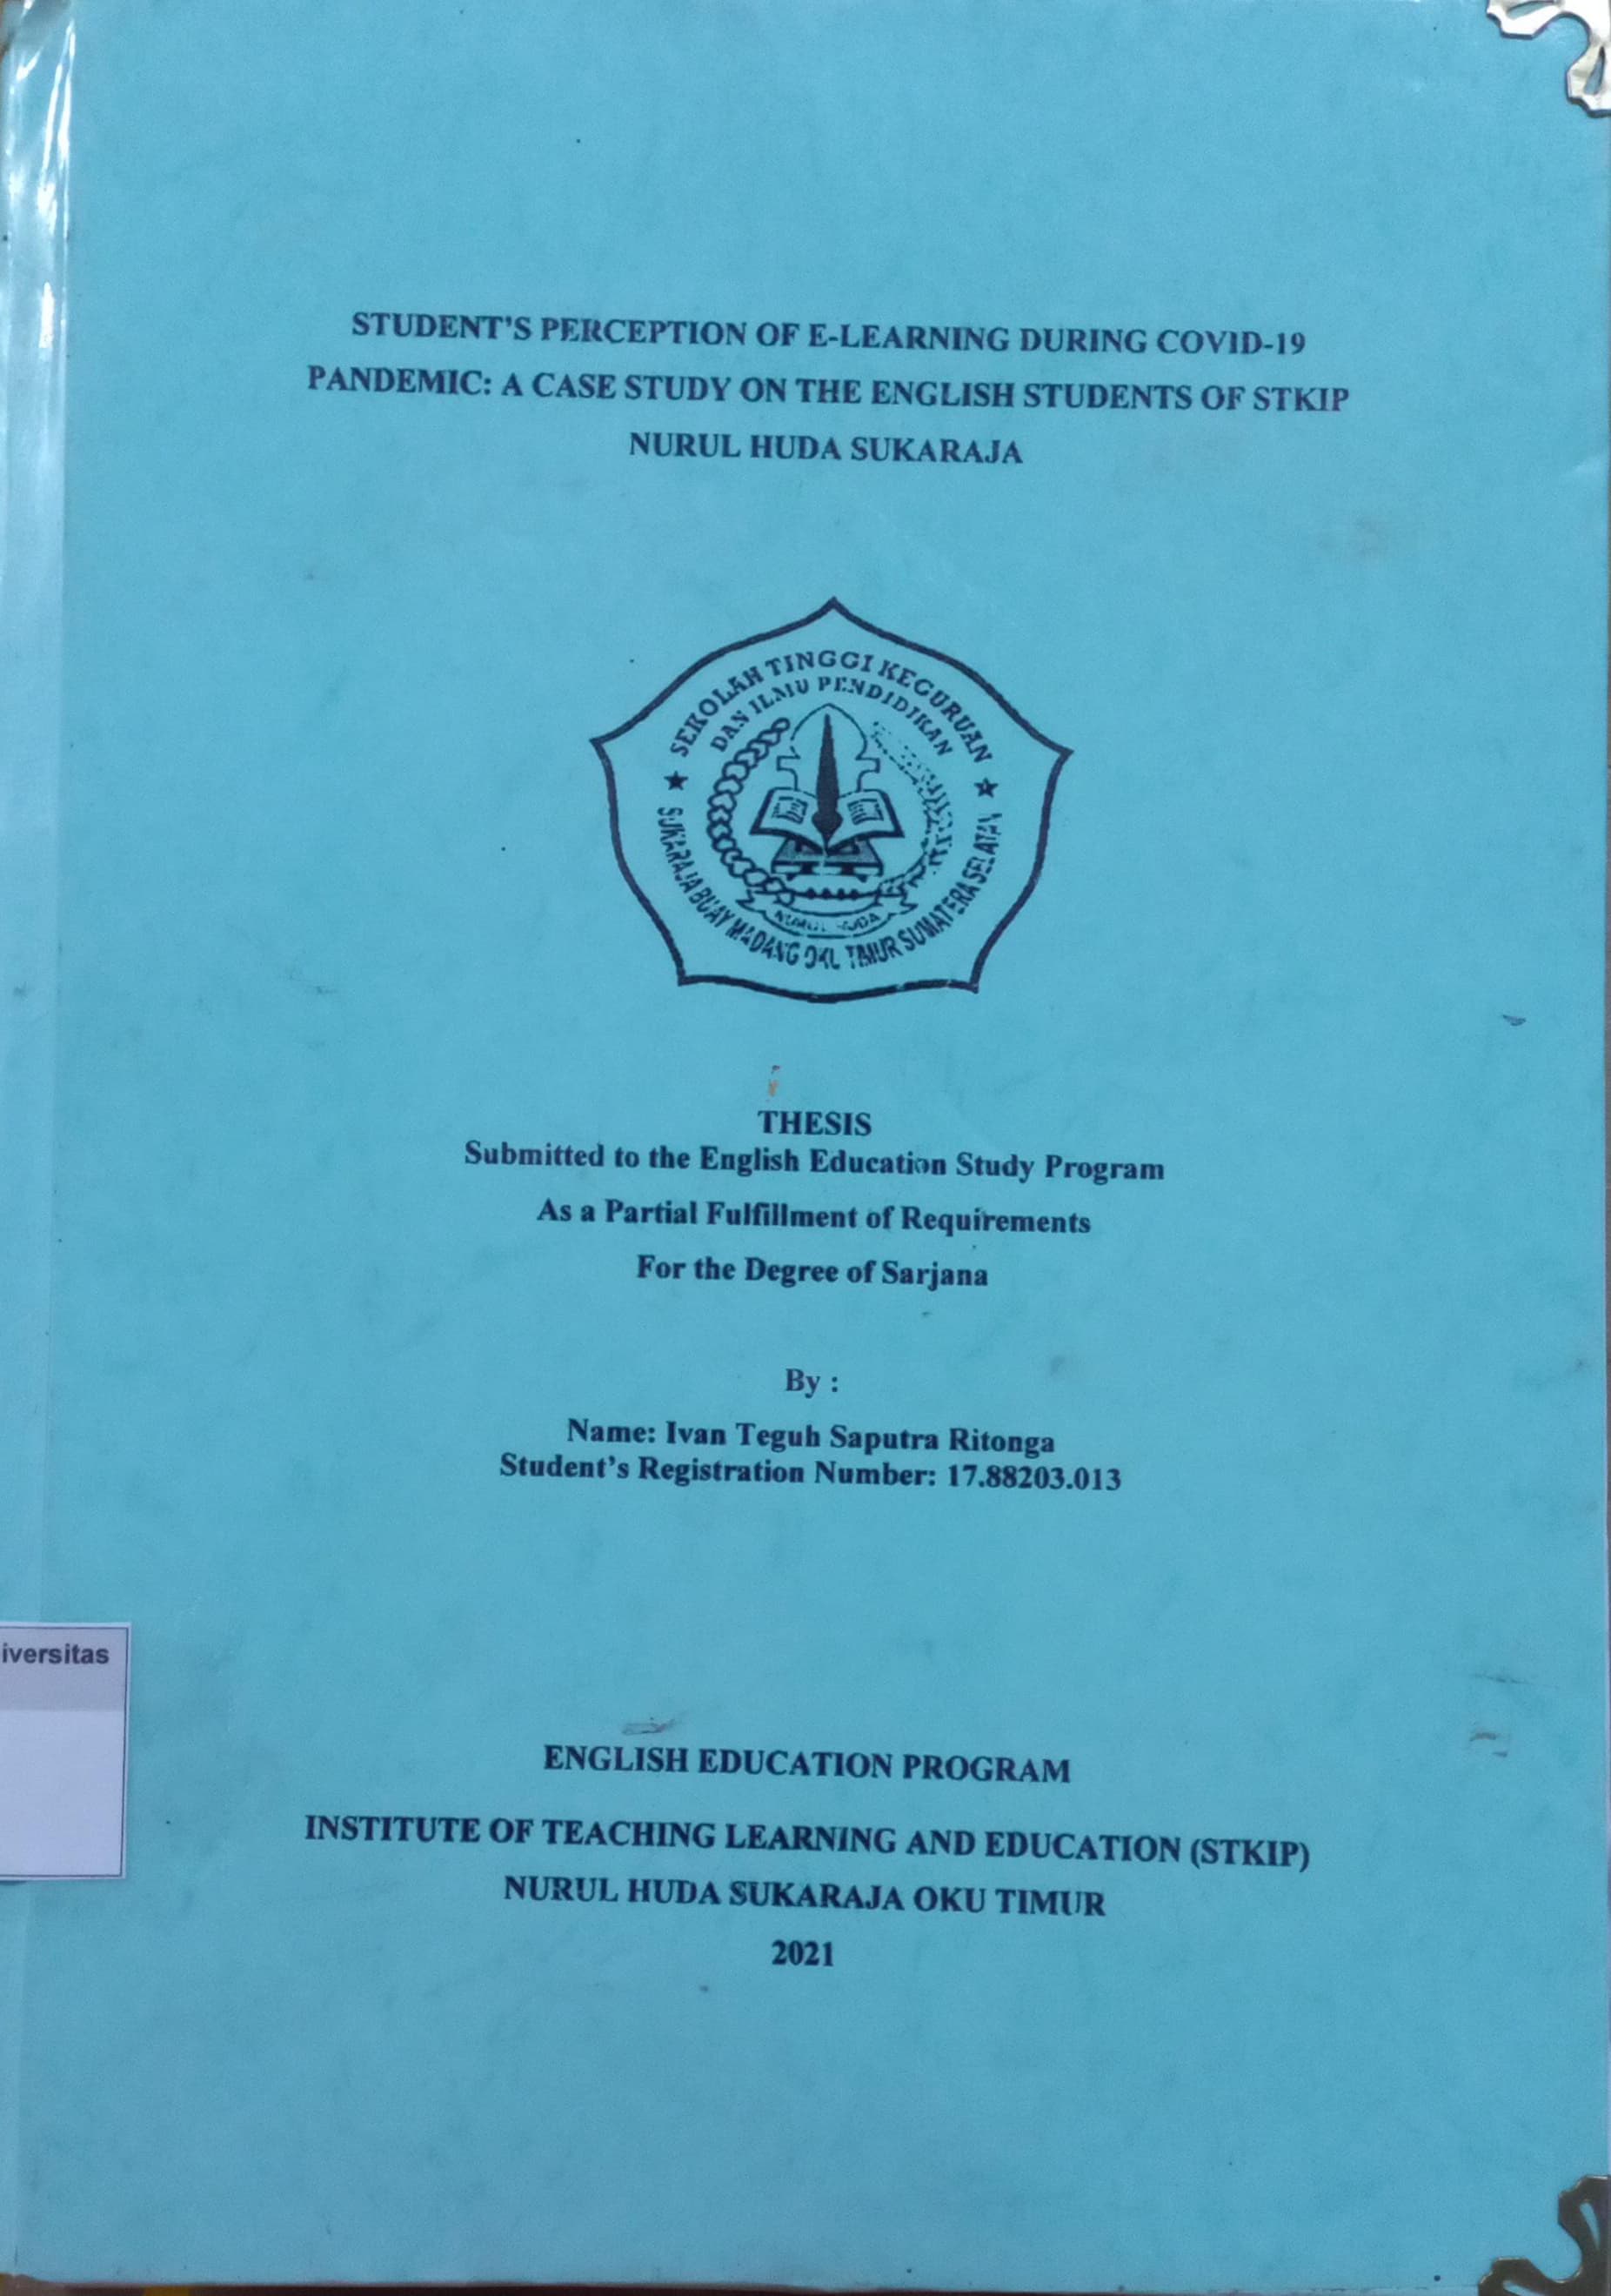 Student's Perseption of E-Learning During Covid-19 Pandemic: A Case Study on the English Students of STKIP Nurul Huda Sukaraja